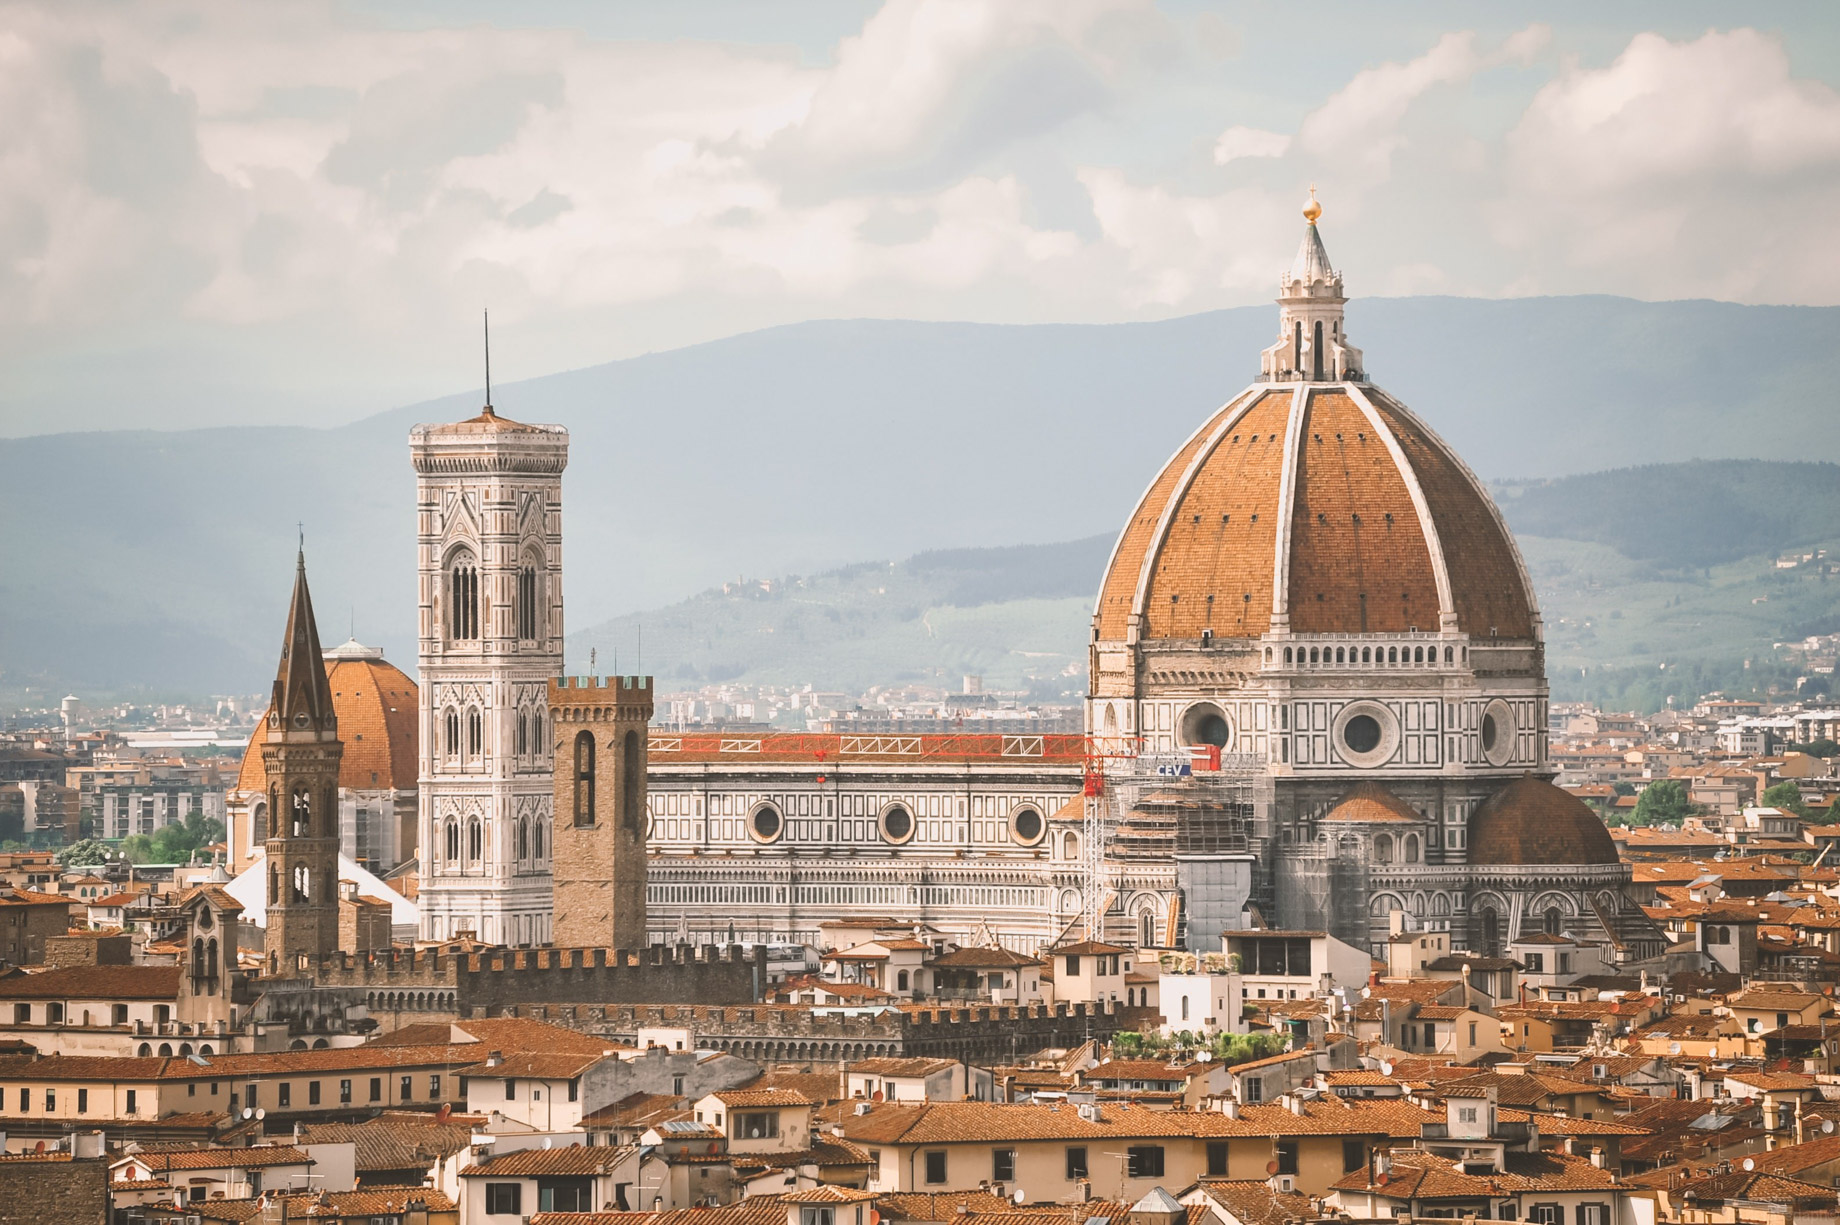 Relais Santa Croce By Baglioni Hotels & Resorts – Florence, Italy – Cathedral of Santa Maria del Fiore